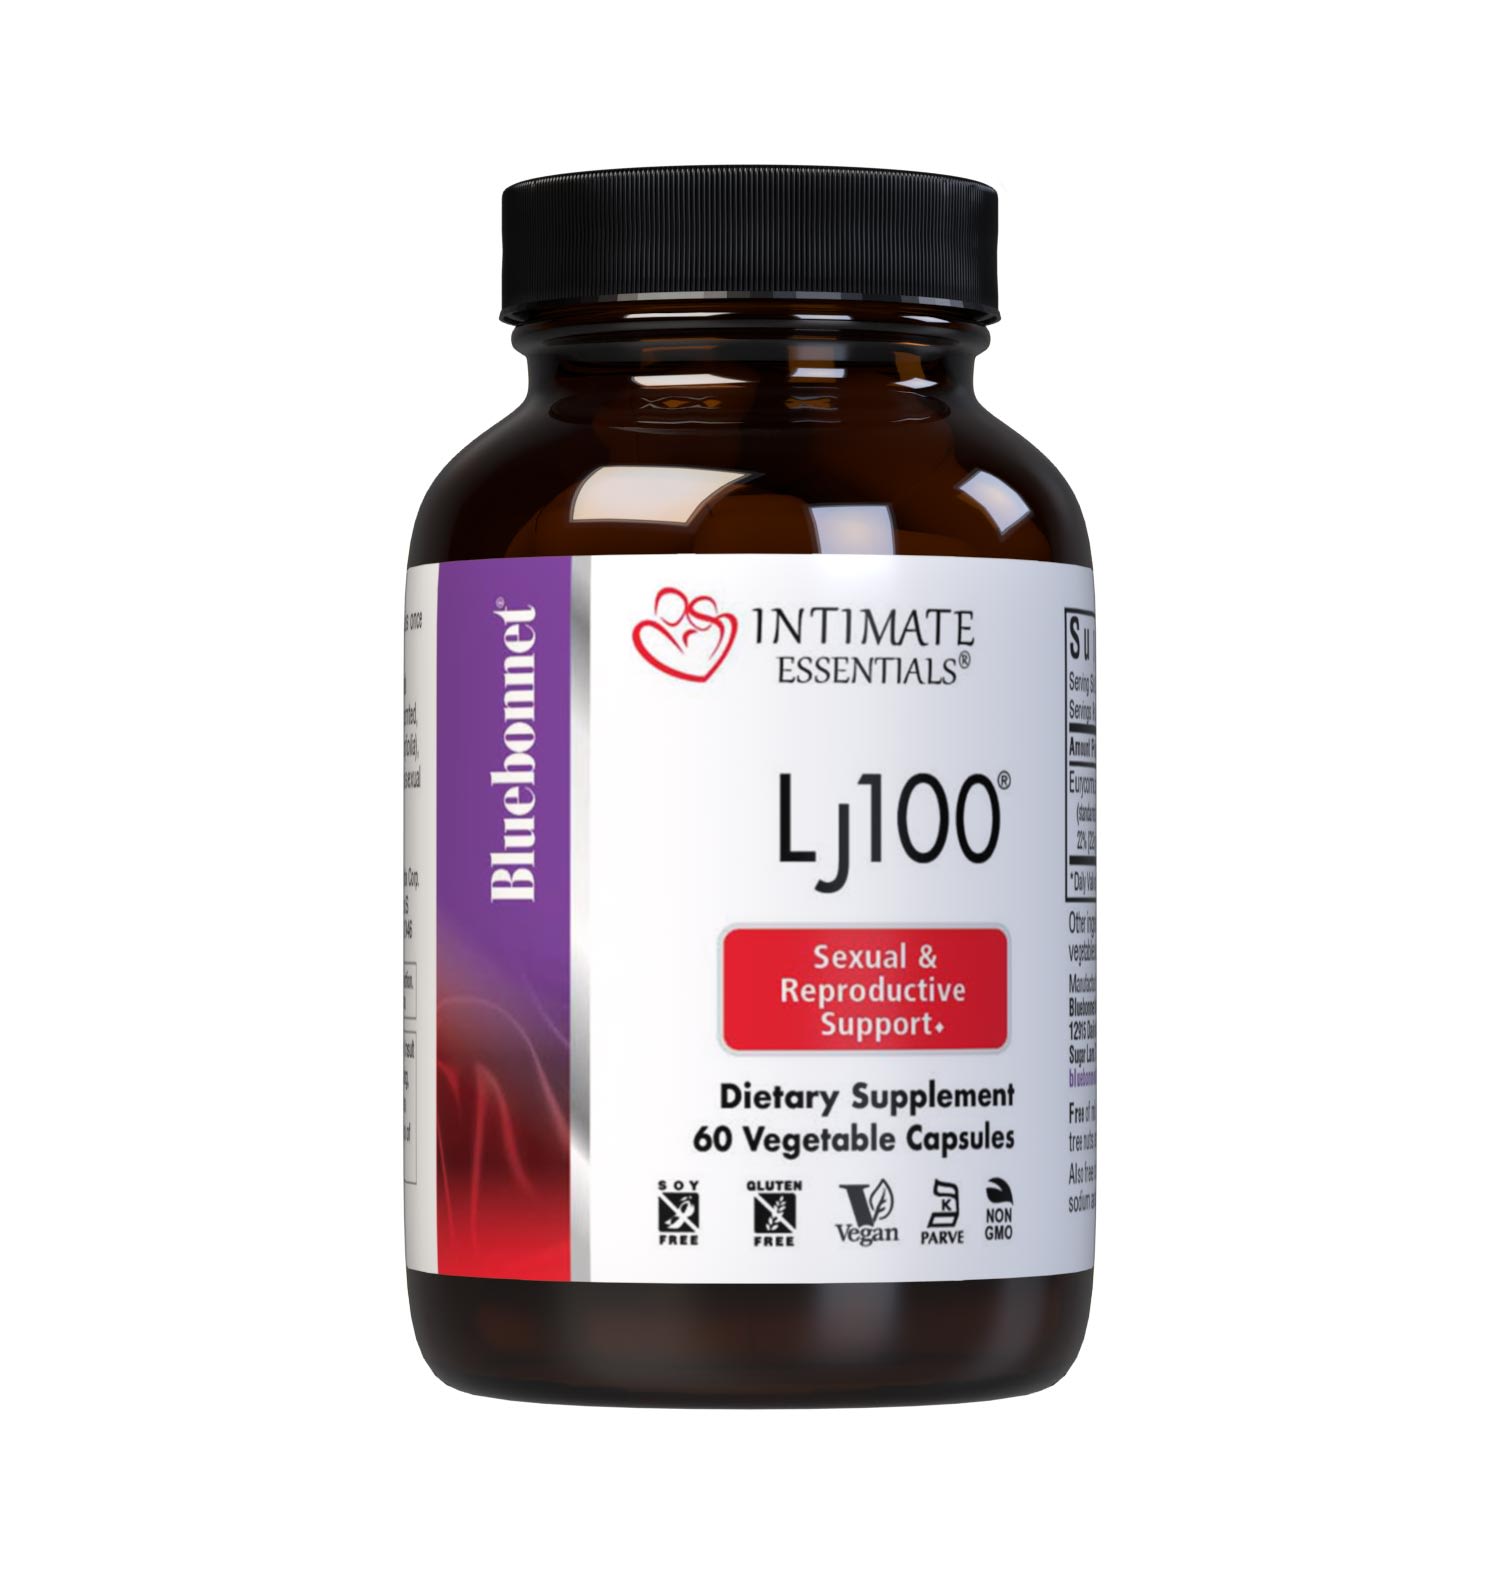 Bluebonnet’s Intimate Essentials LJ100 Vegetable Capsules are specially formulated with LJ100, a patented, standardized Tongkat Ali root extract (Eurycoma longifolia), clinically studied for enhancing both male and female sexual health and fertility. #size_60 count